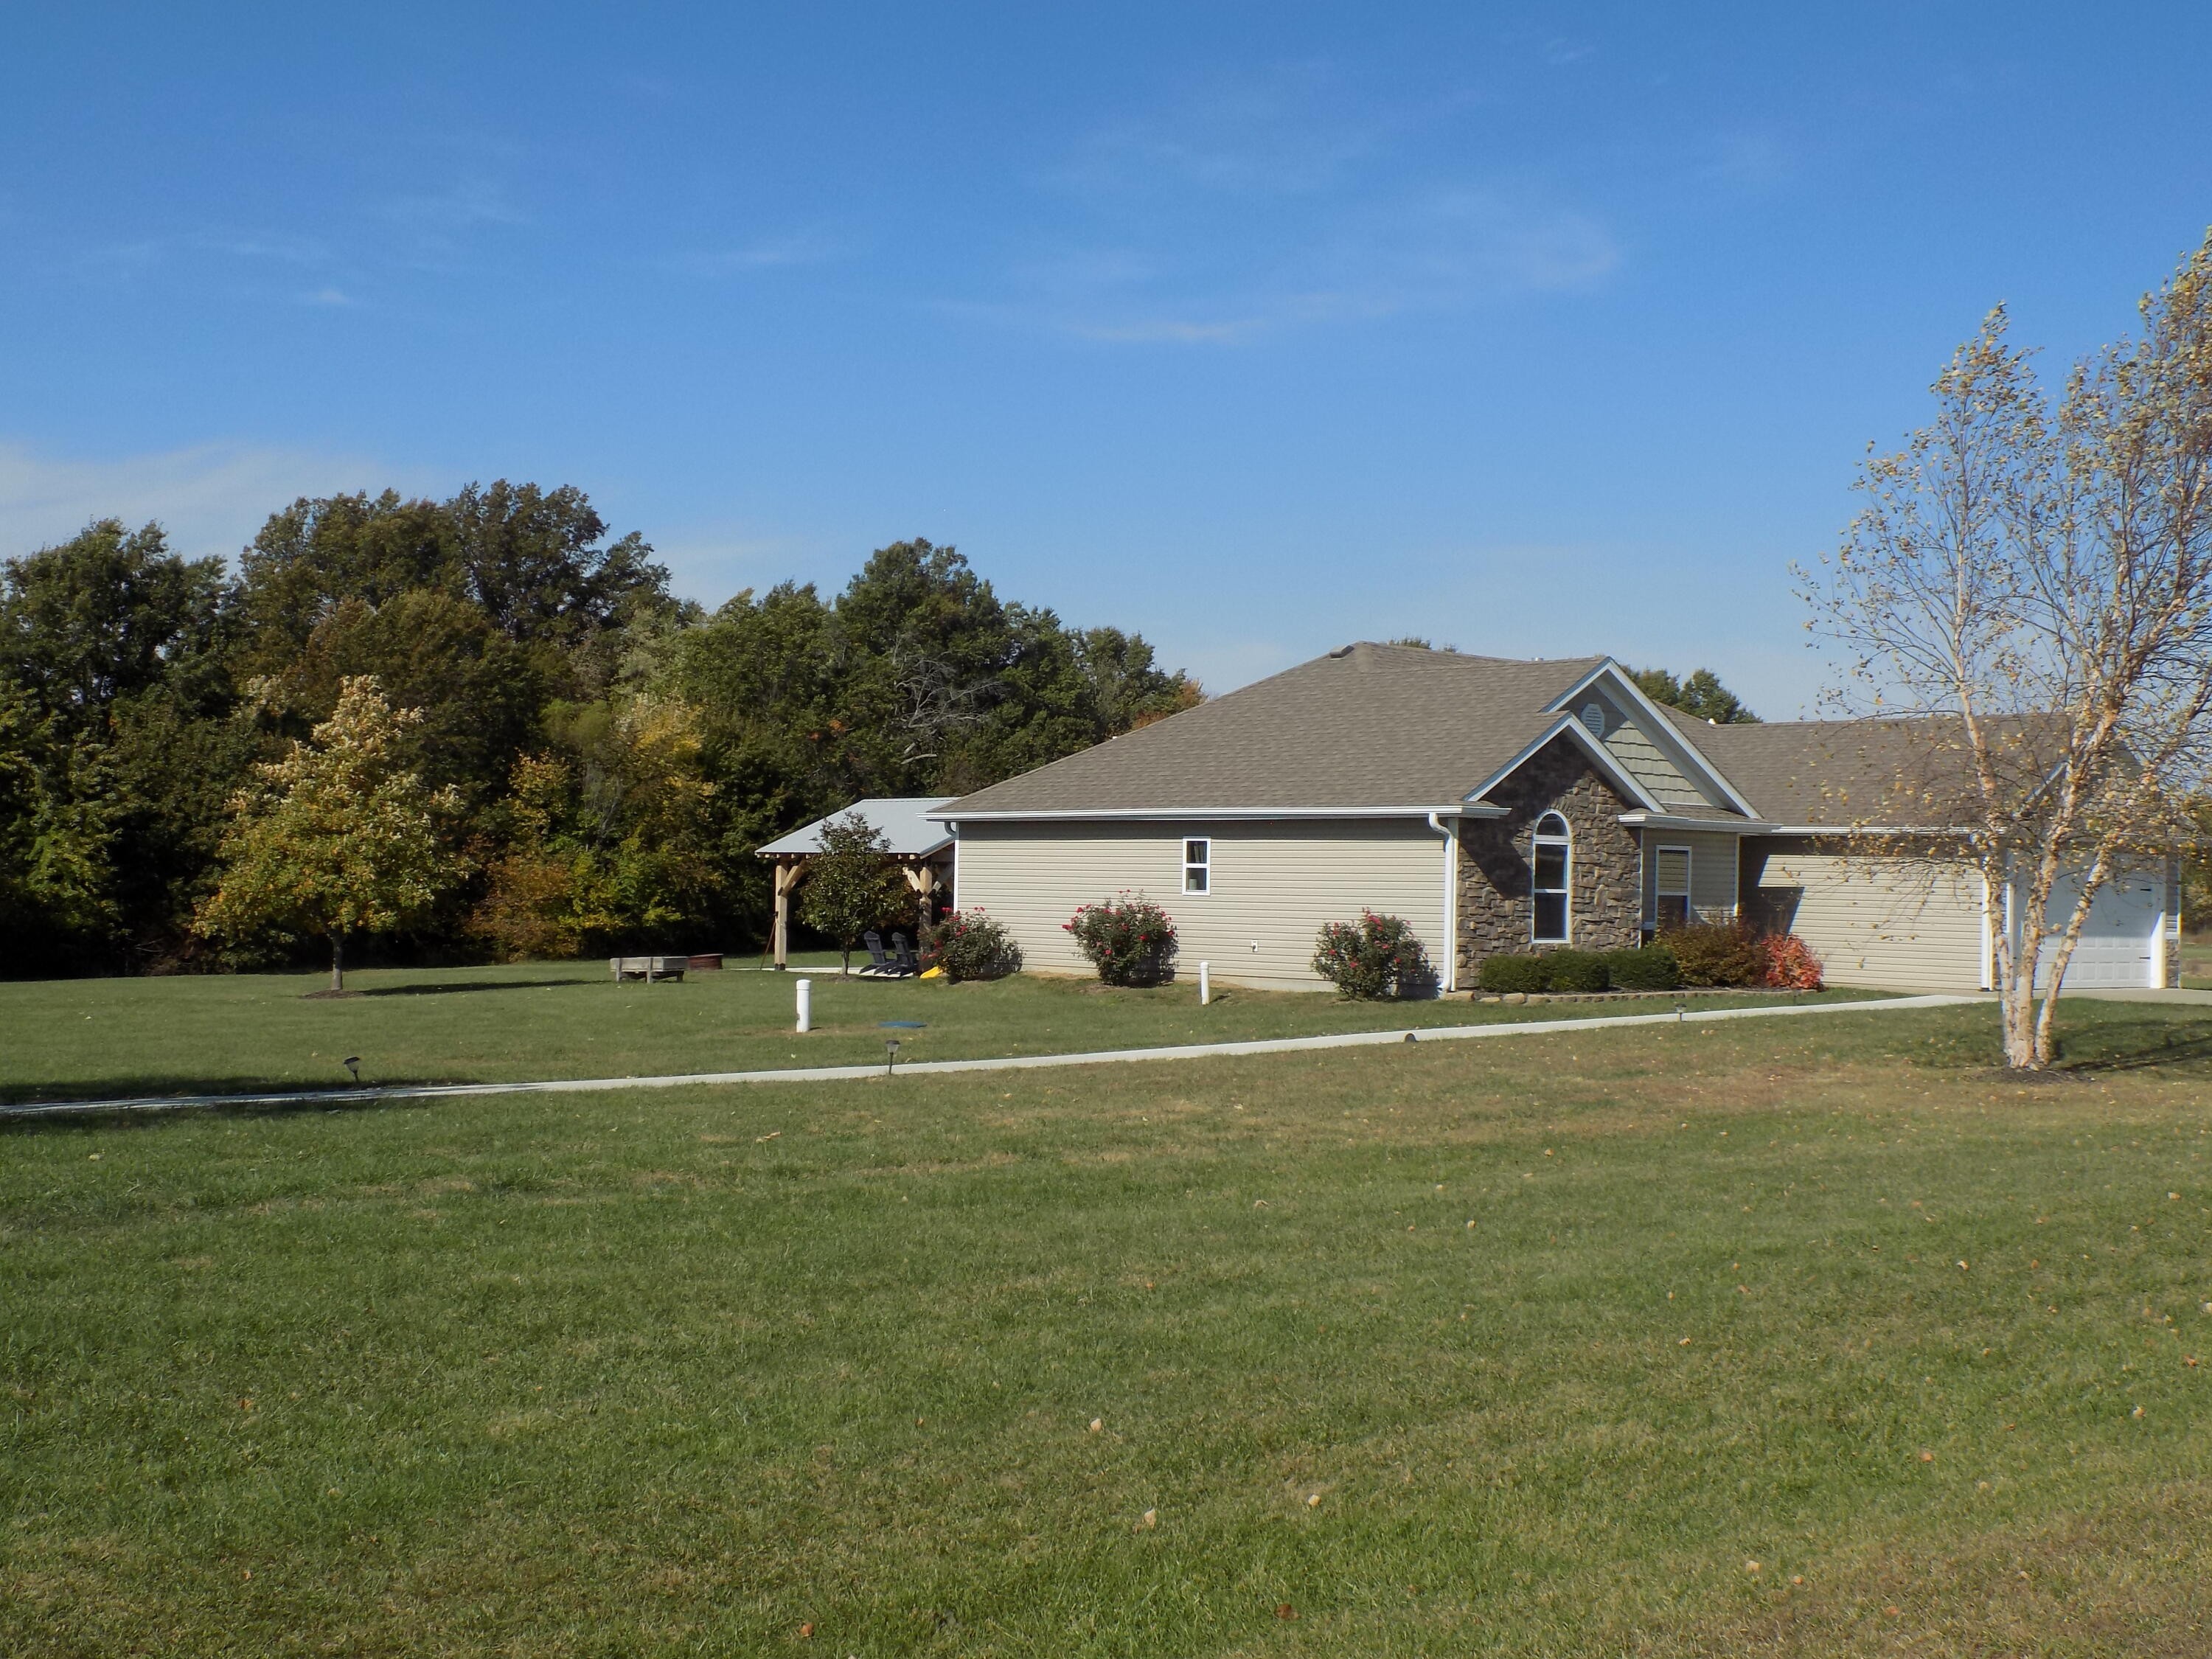 2. 6875 Audrain County Road 111